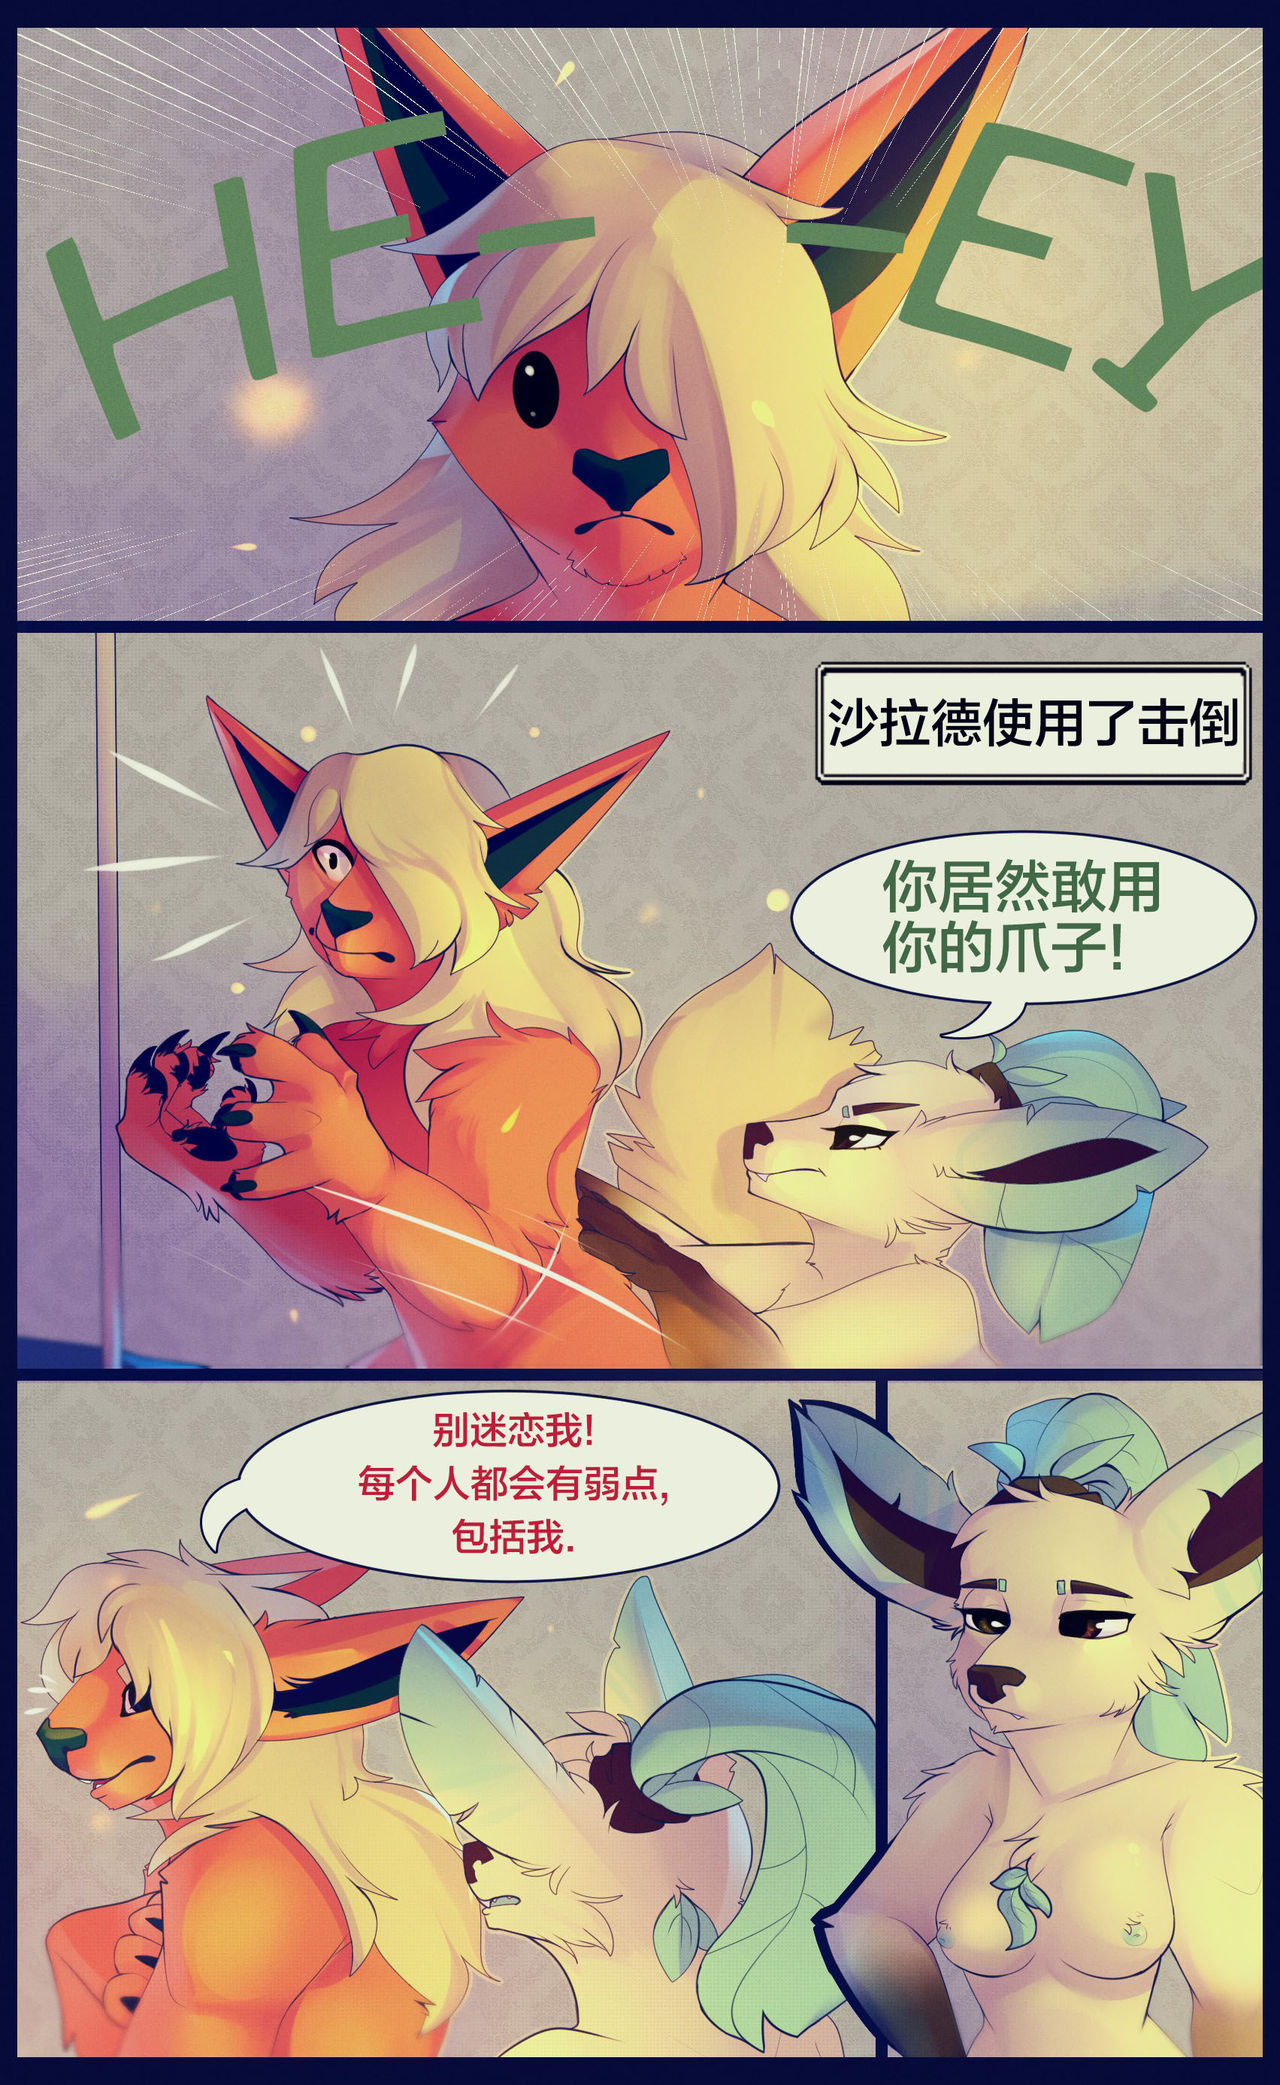 [Elvche] Hotdogs (ongoing) [Chinese] [逃亡者x新桥月白日语社汉化] [Elvche] Hotdogs (ongoing) [中国翻訳]